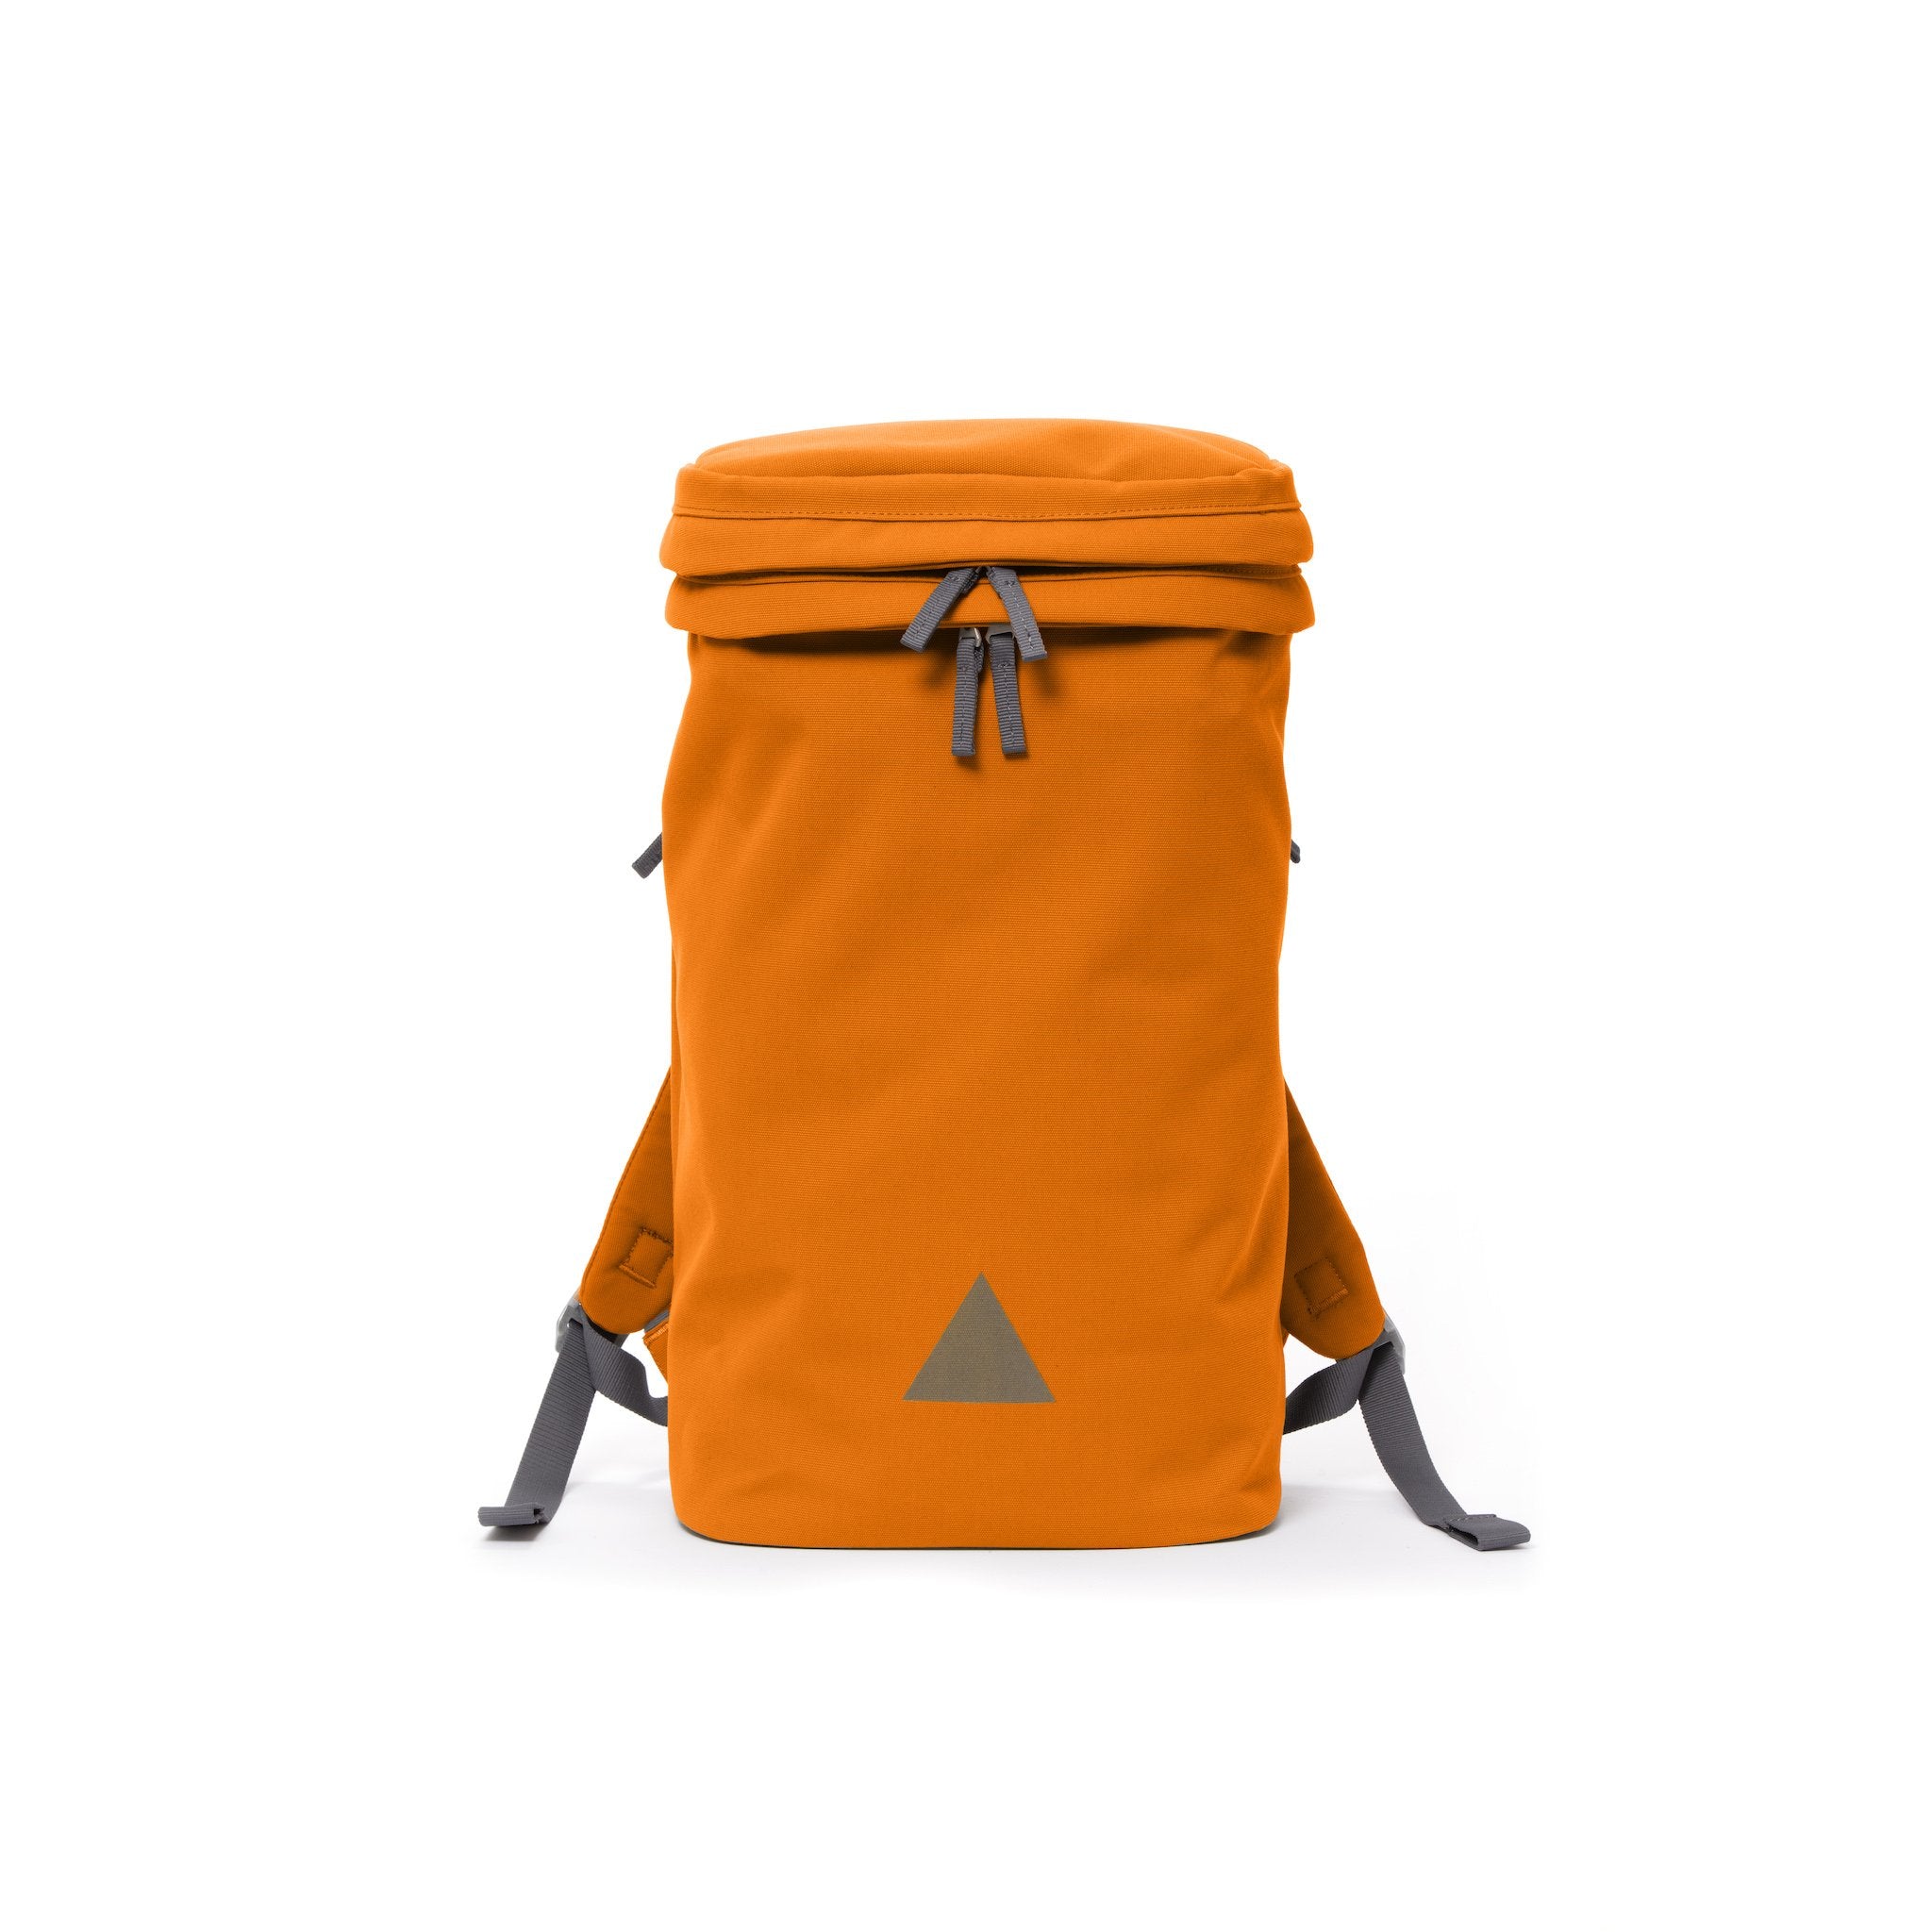 Orange canvas backpack with zip opening, padded shoulder straps and triangle logo.